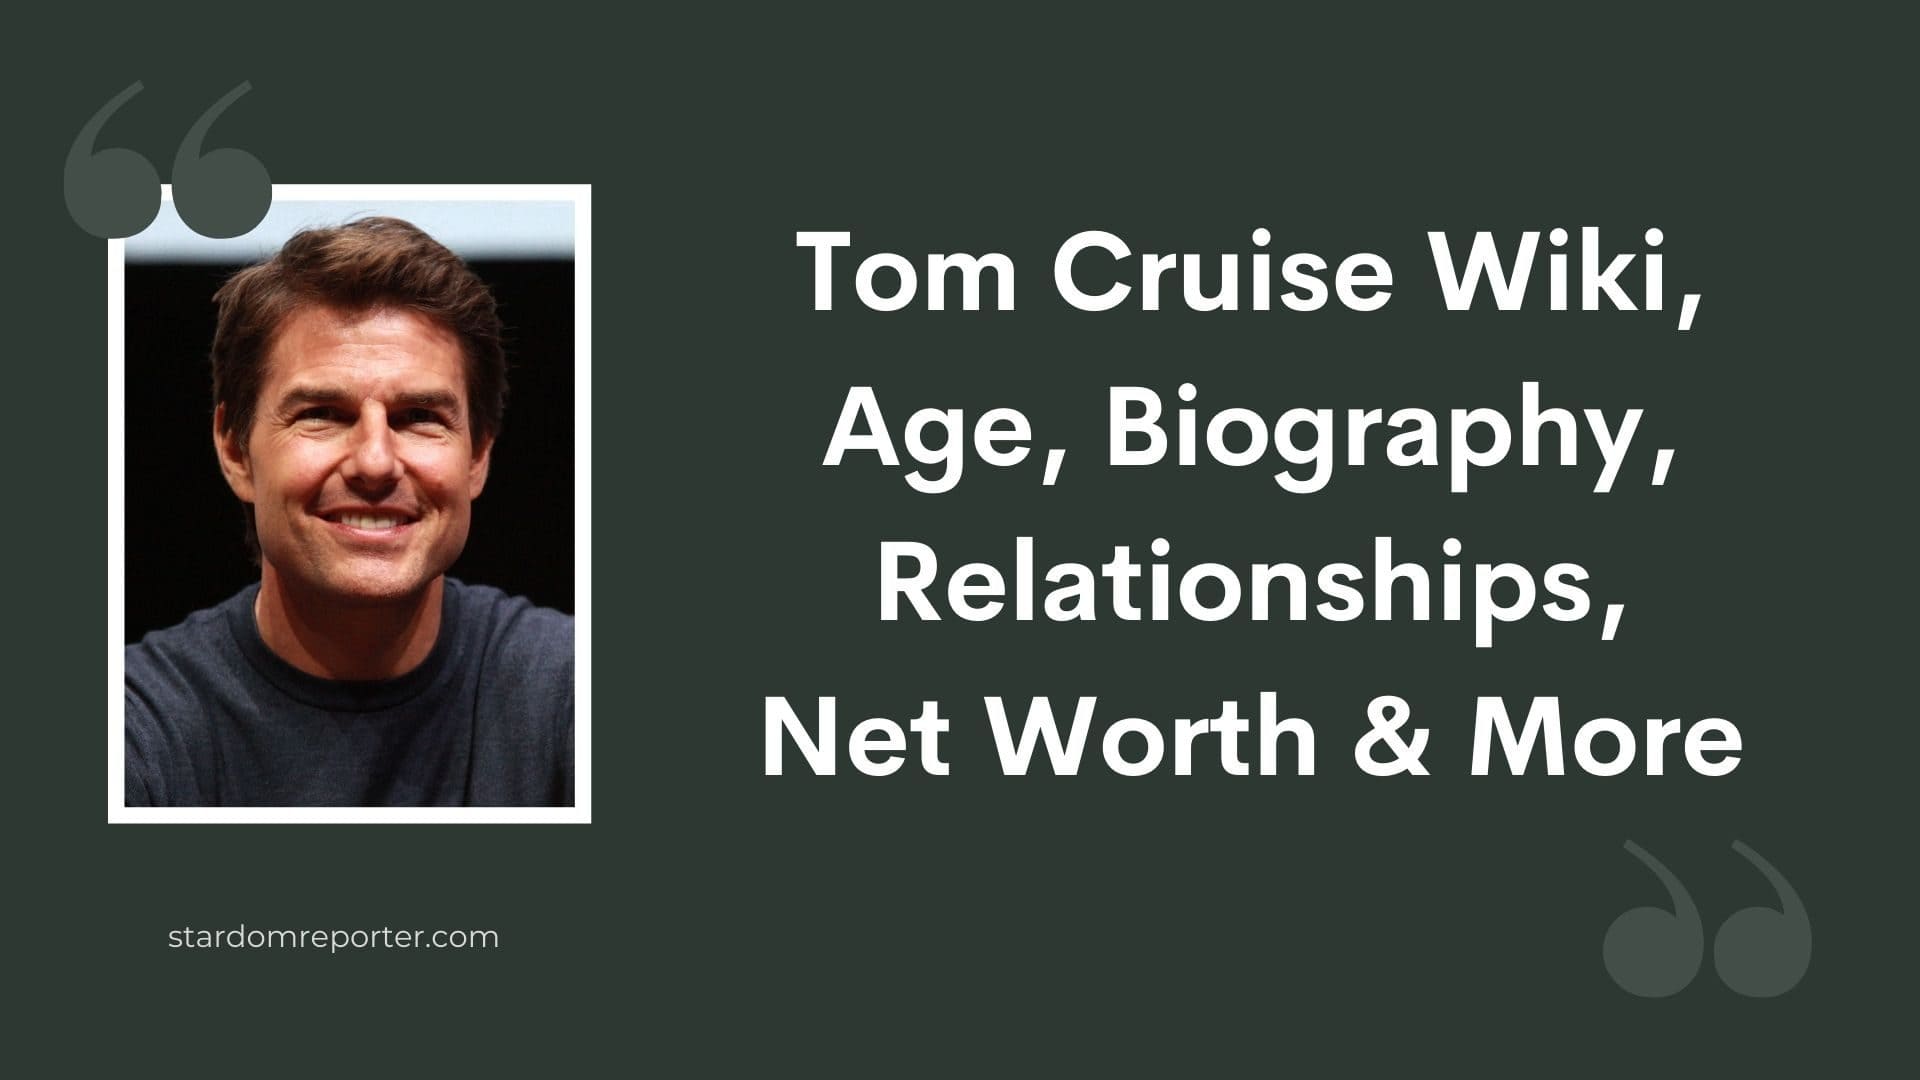 Tom Cruise Wiki, Age, Biography, Relationships, Net Worth & More - 11